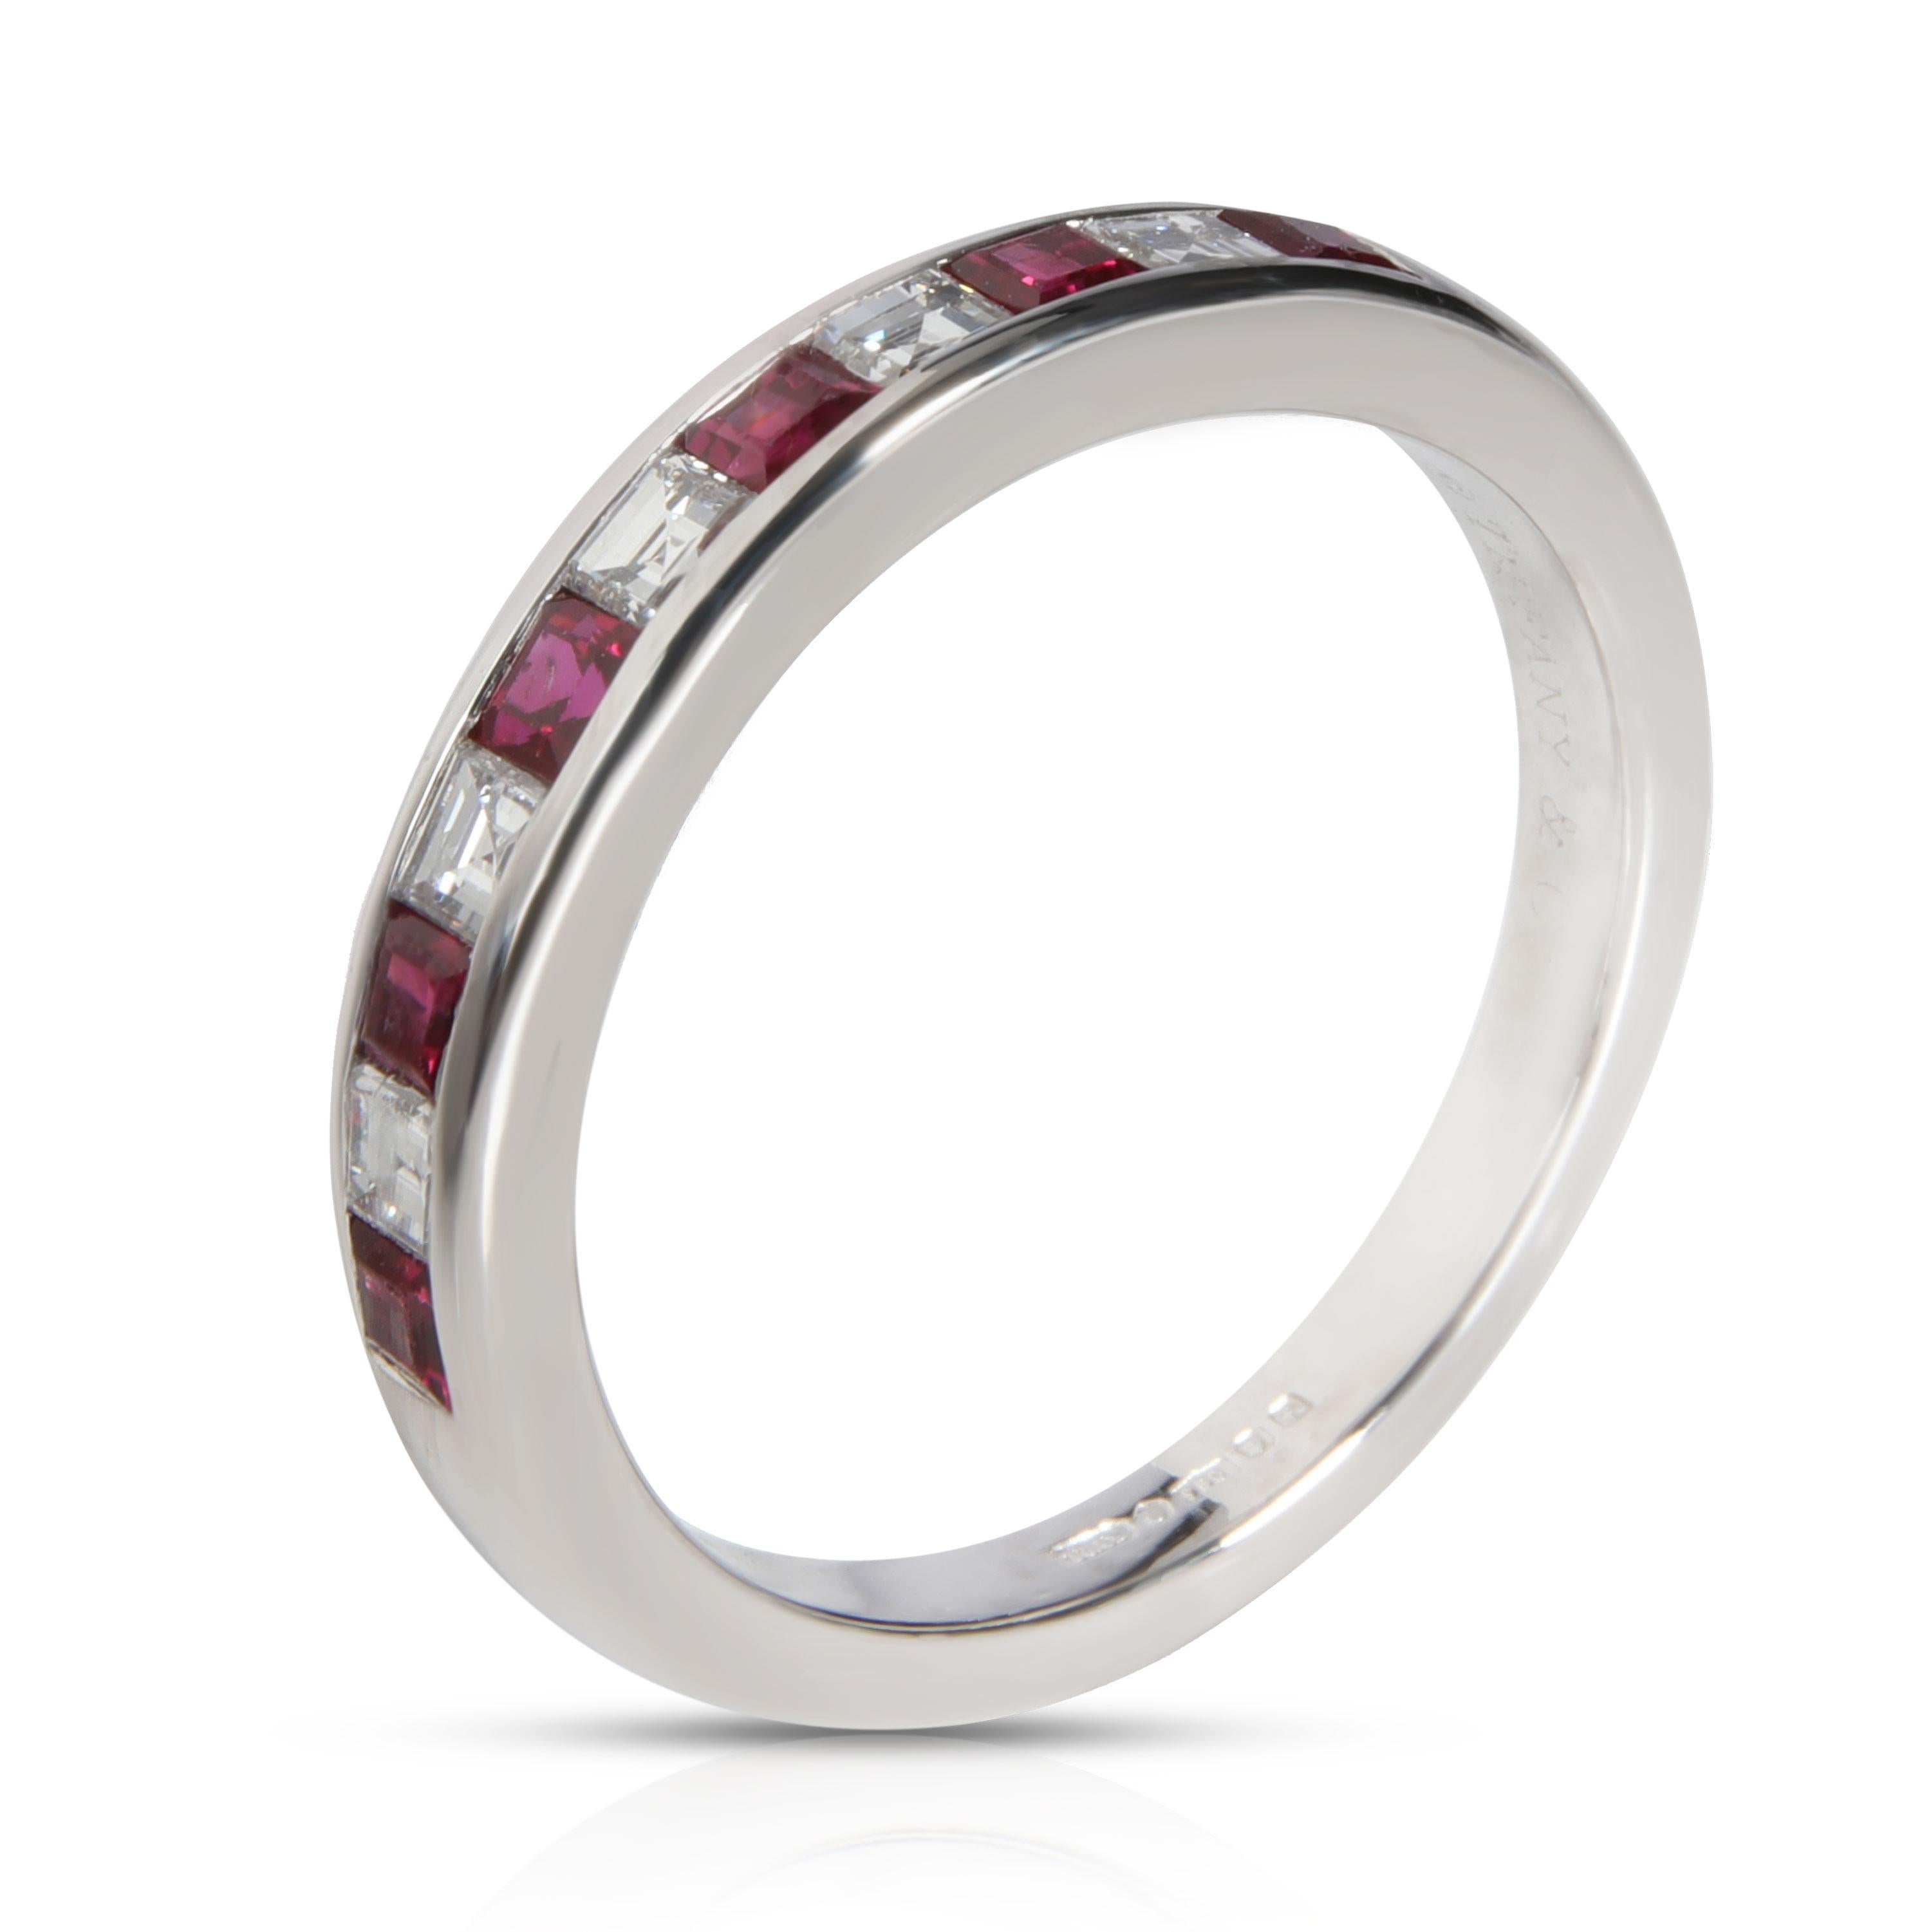 Tiffany & Co. Channel Set Ruby Diamond Band in Platinum 0.25 CTW

SKU: 107662

In excellent condition and recently polished. Ring size is 7.

Brand: Tiffany & Co.
Metal Type: Platinum
Ring Size: 7

CENTER STONE INFORMATION
Center Stone 1 Type: